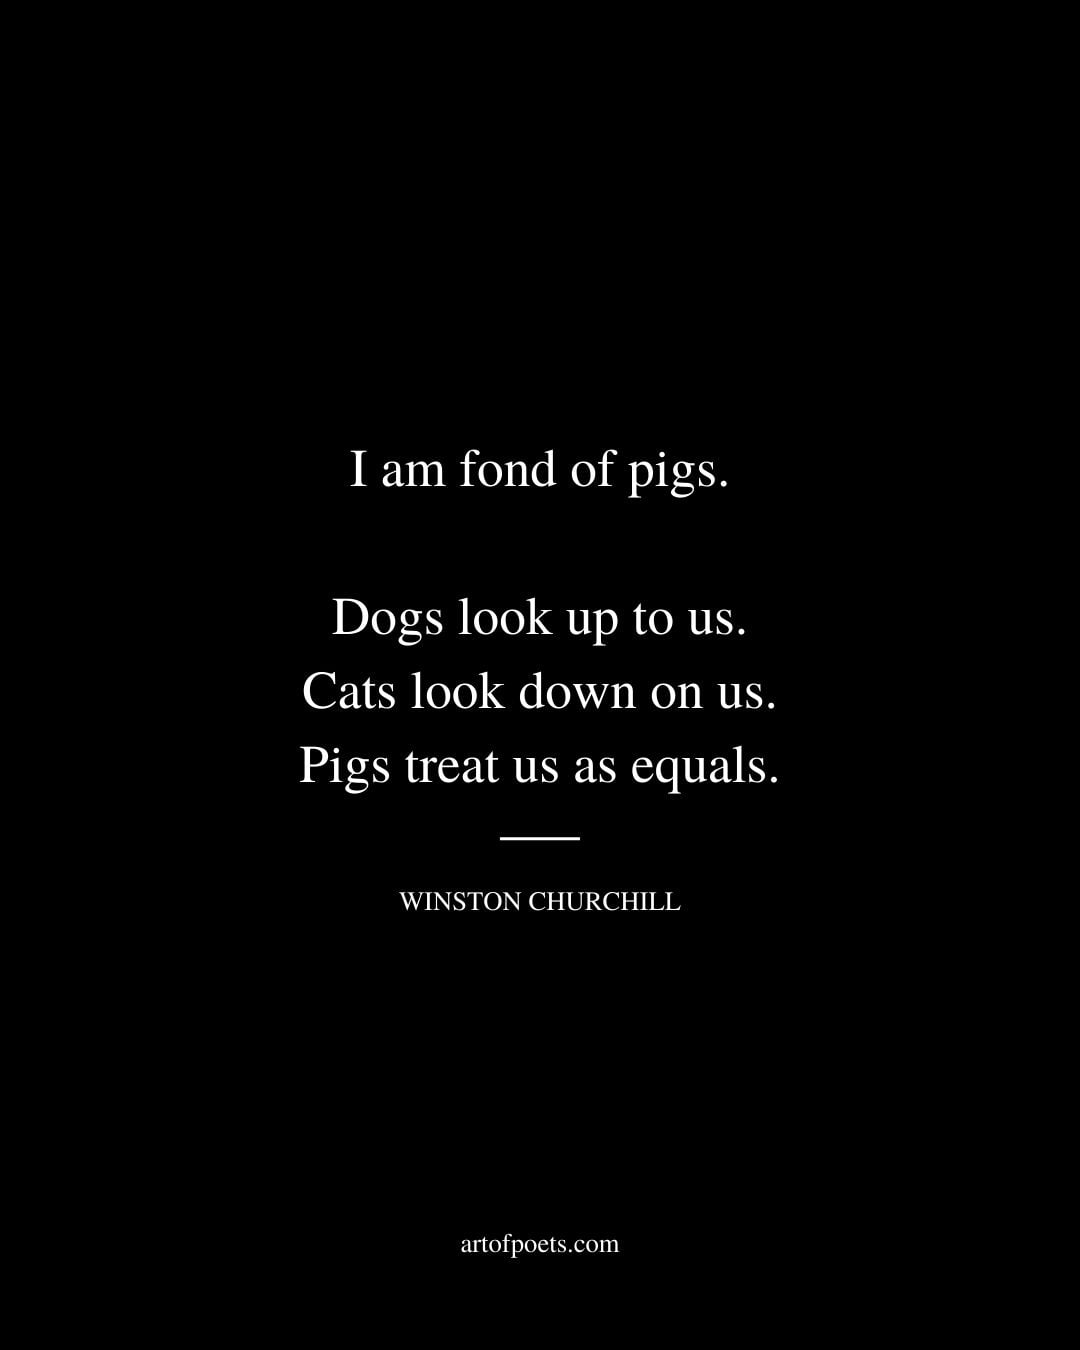 I am fond of pigs. Dogs look up to us. Cats look down on us. Pigs treat us as equals. Winston Churchill